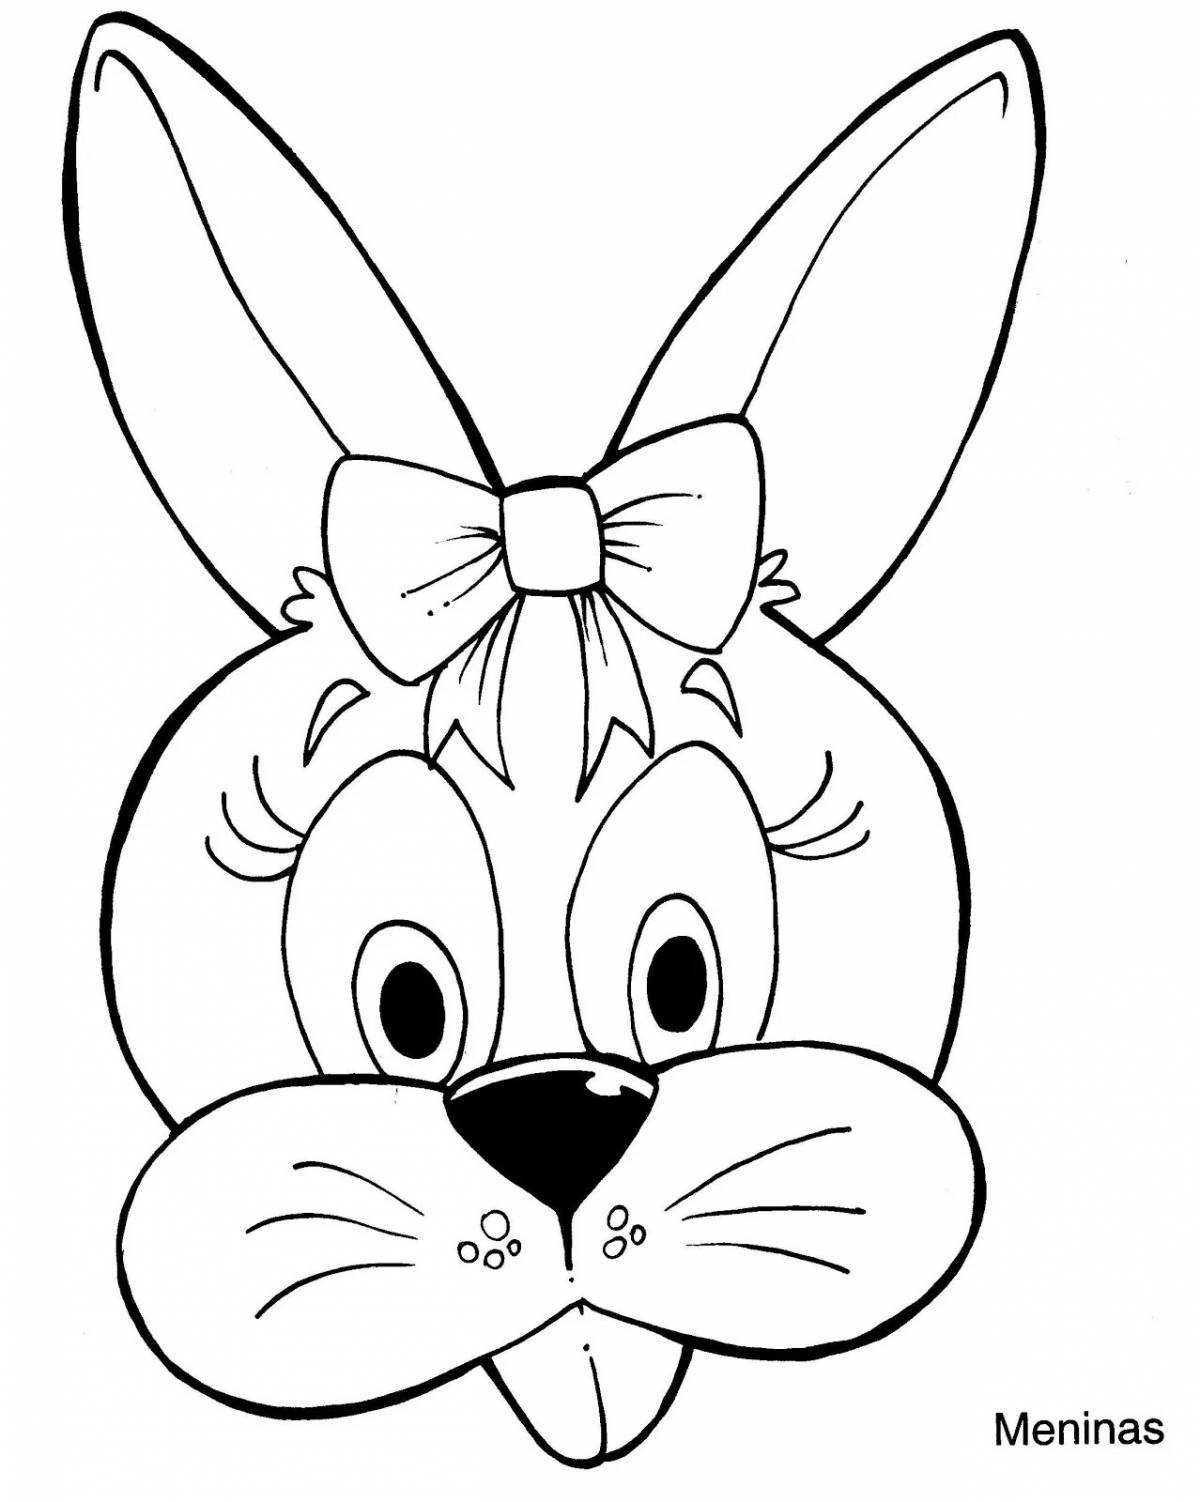 Animated rabbit head coloring book